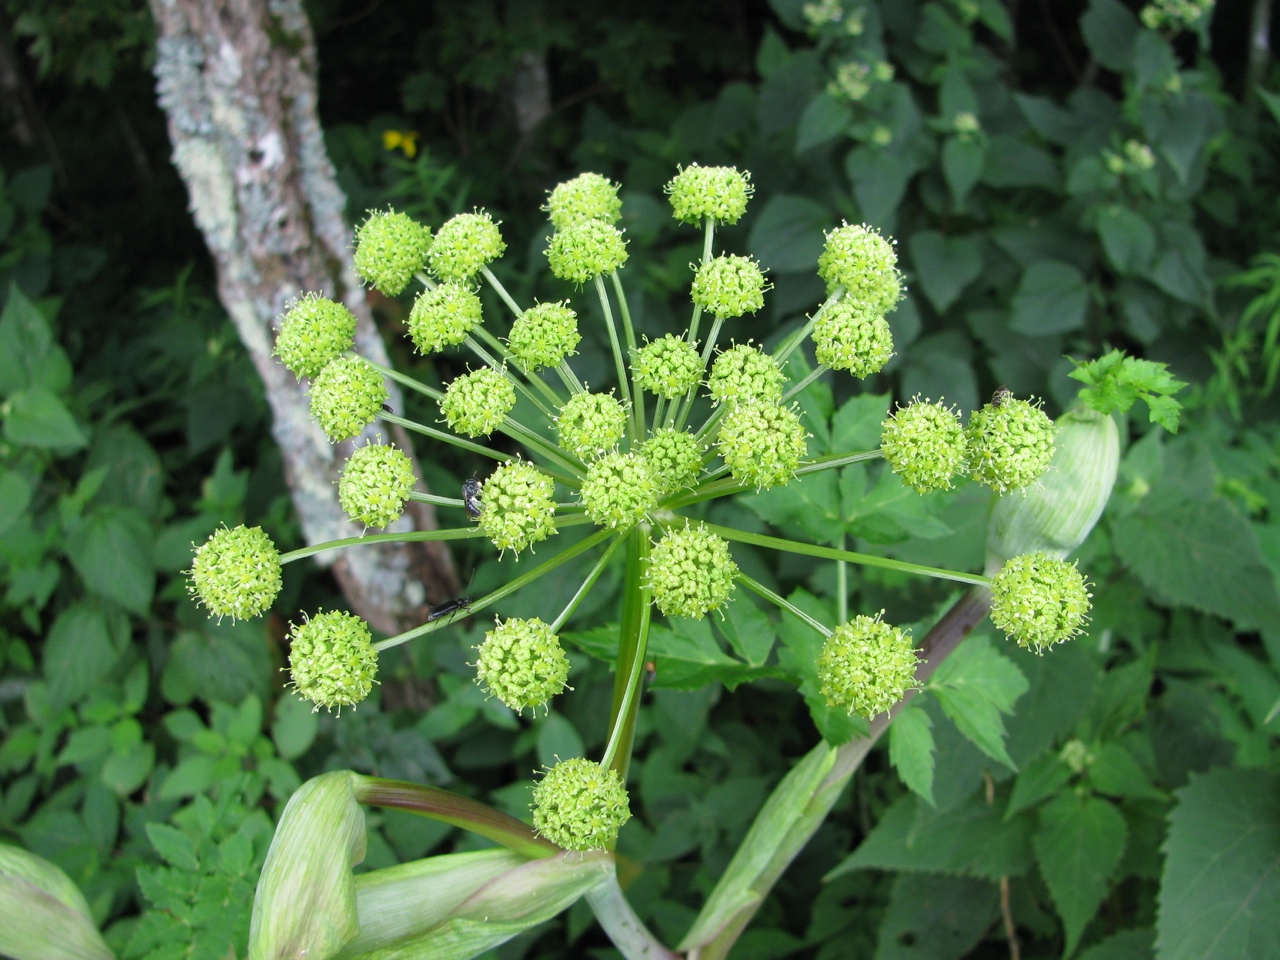 The Scientific Name is Angelica triquinata. You will likely hear them called Filmy Angelica, Mountain Angelica, Appalachian Angelica. This picture shows the Close-up of inflorescence of Angelica triquinata